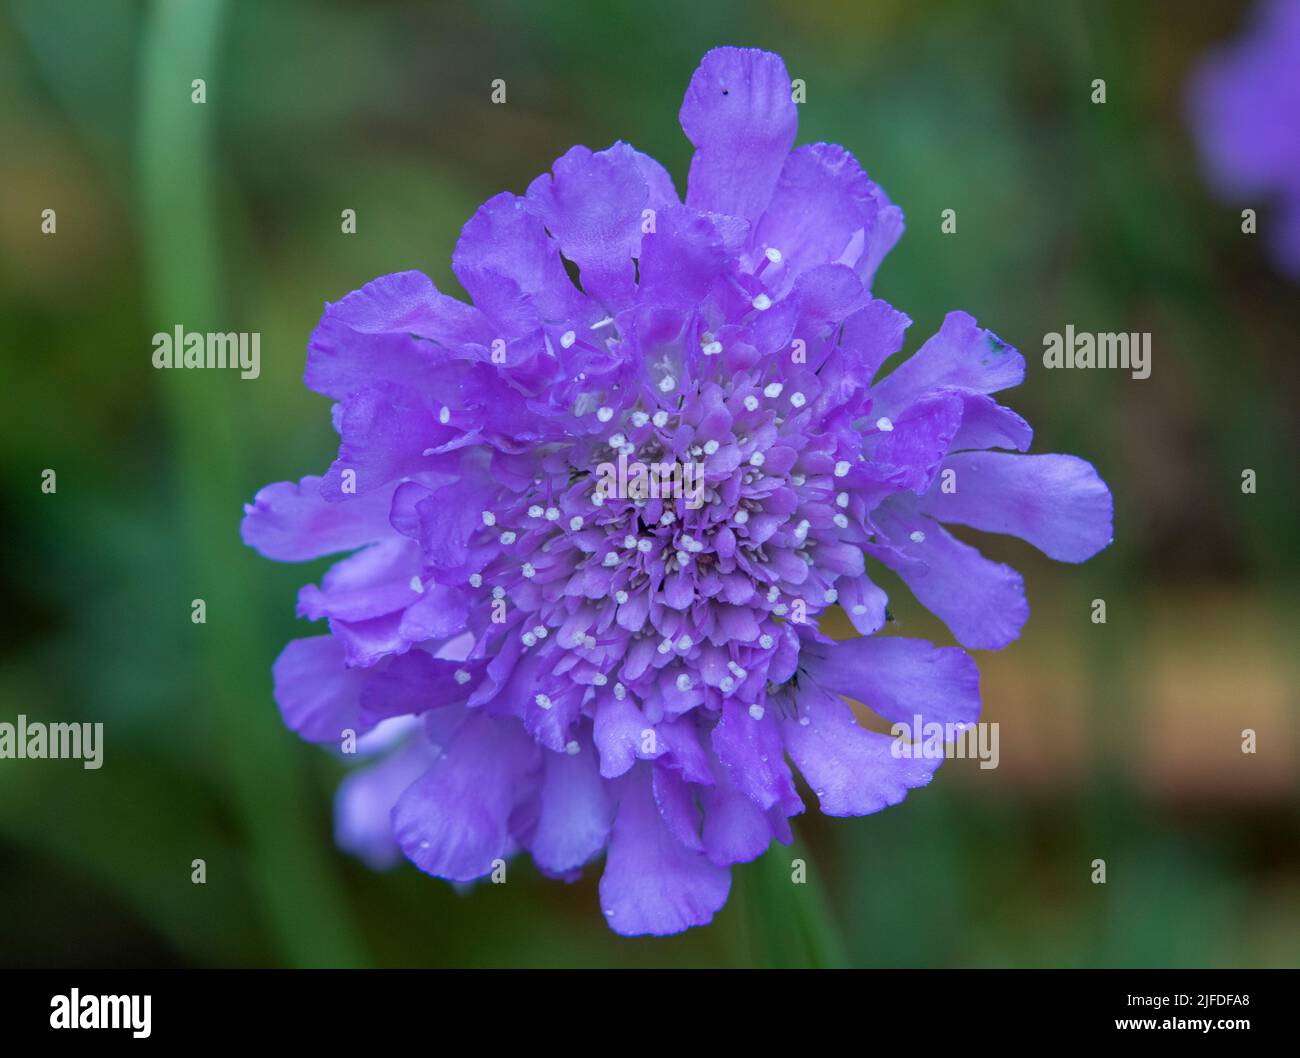 Scabious flower in bloom Stock Photo